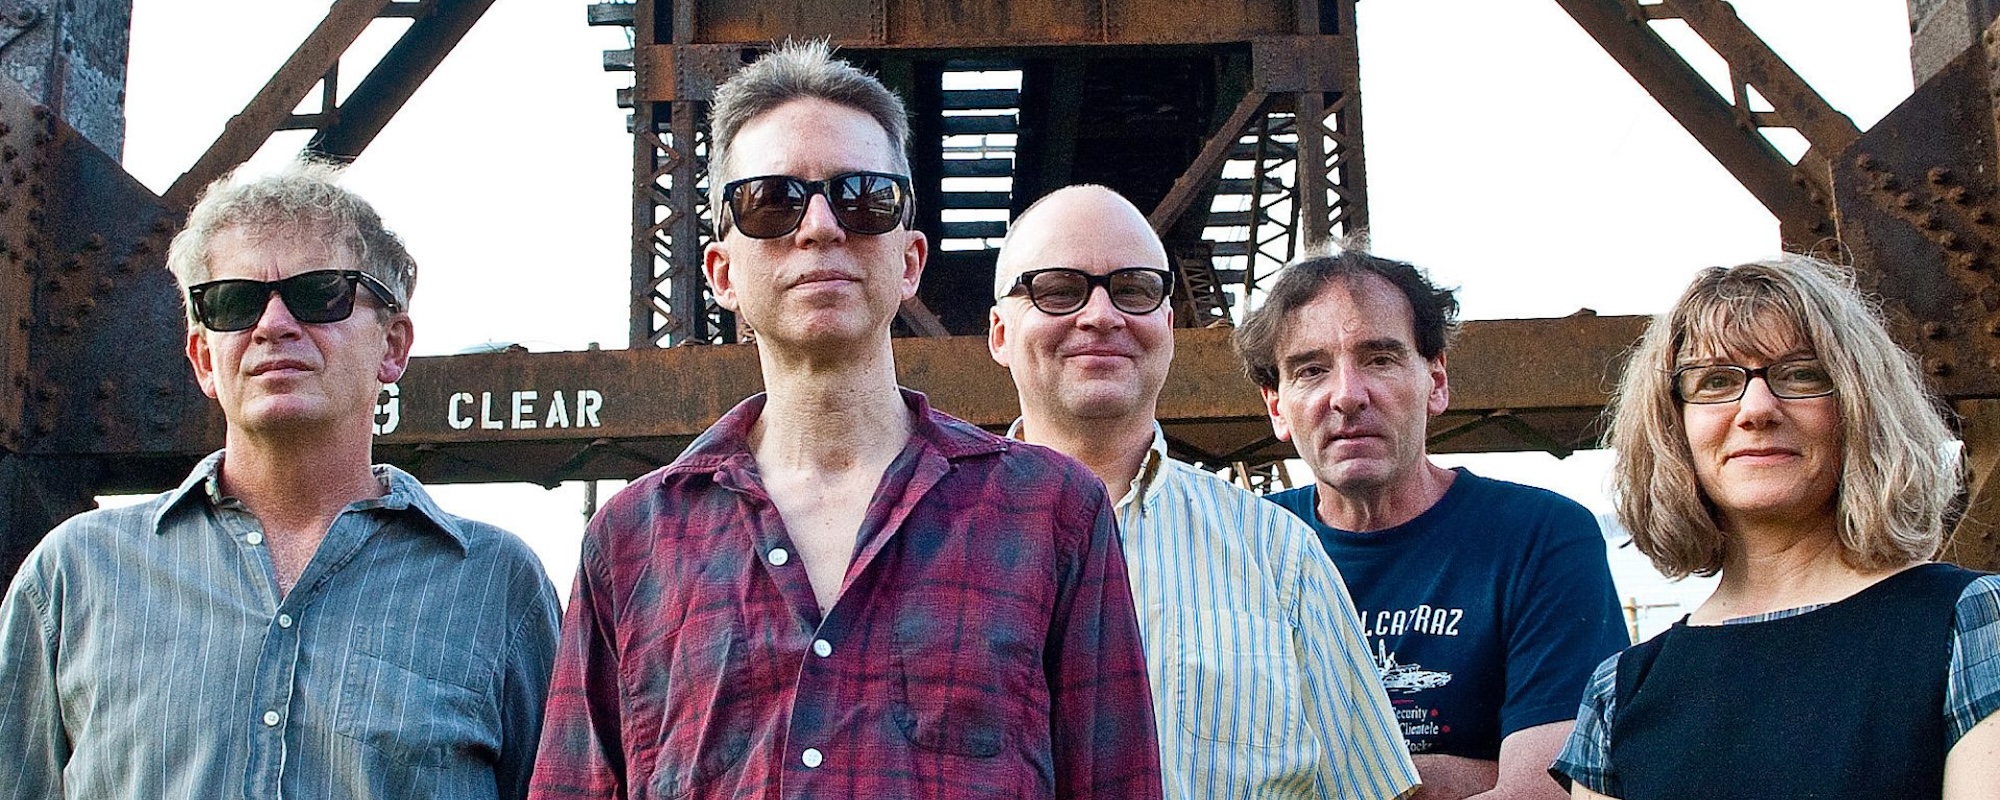 The Feelies’ Glenn Mercer on Showing ‘Some Kind of Love’ Covering the Music of the Velvet Underground, Writing, and Returning to The Willies